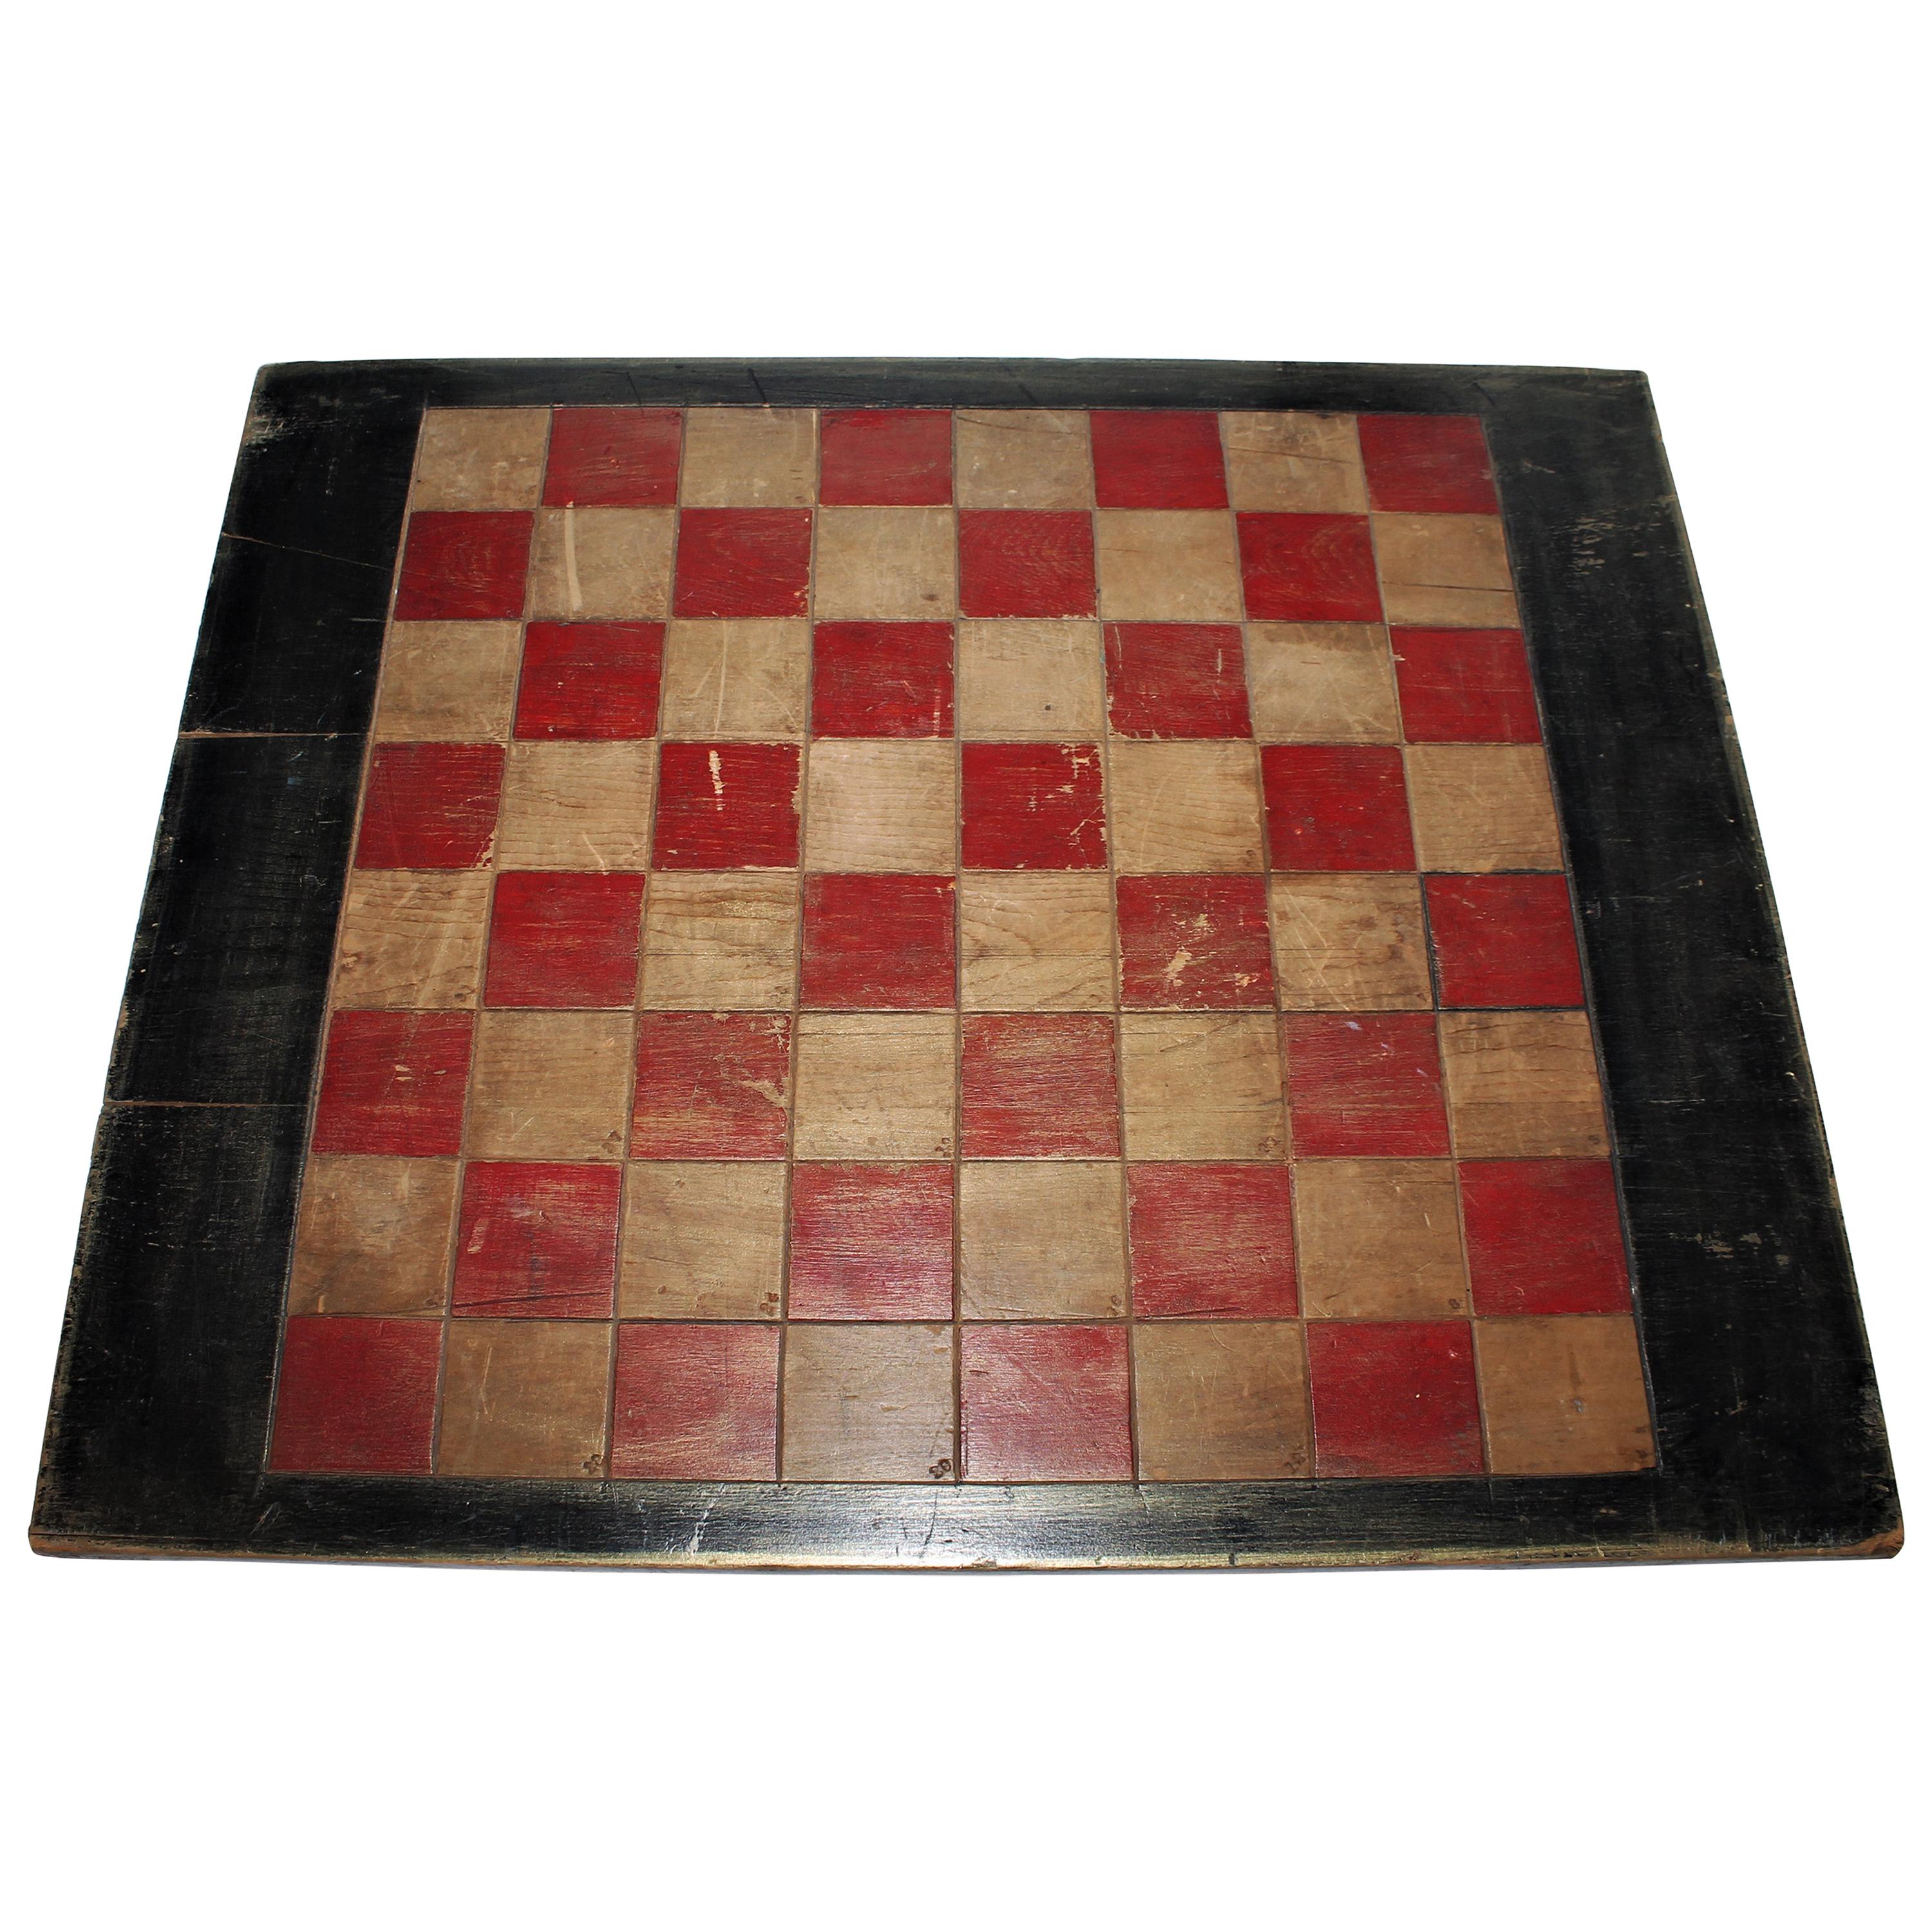 Early 20th Century Original Painted Game Board